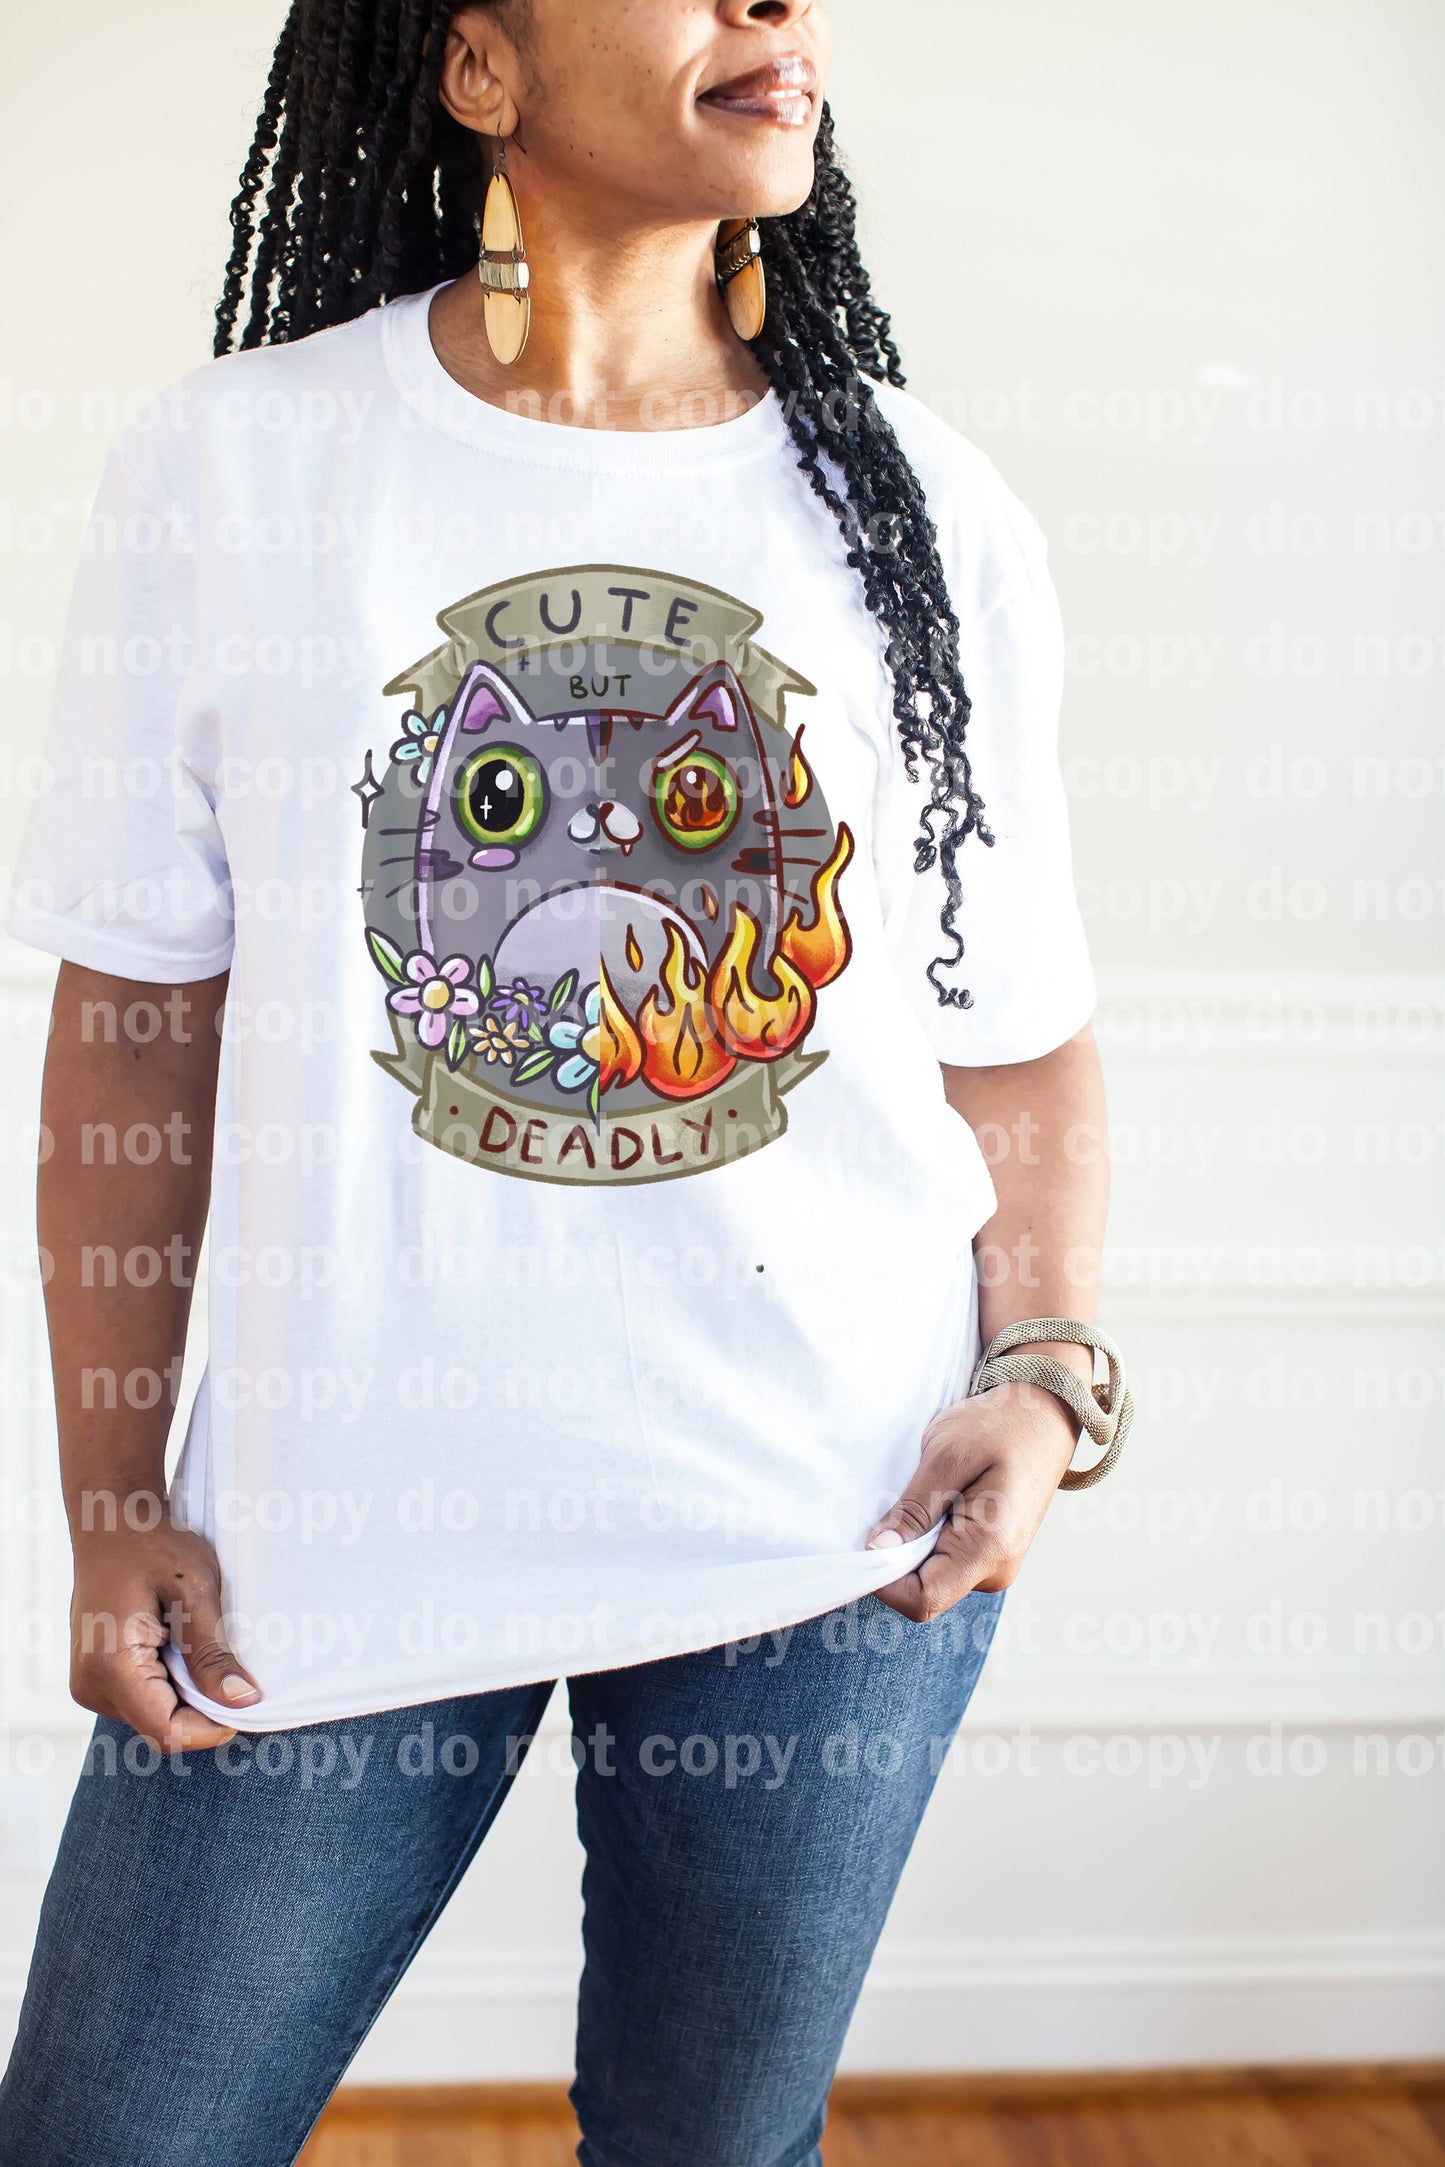 Cute But Deadly Dream Print or Sublimation Print